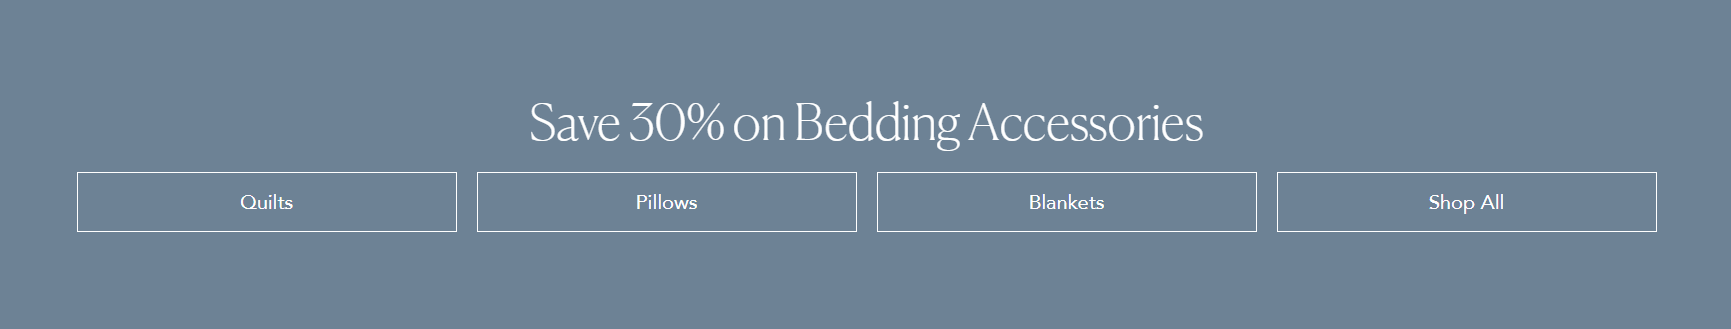 Sheridan Save 30% OFF on bedding accessories